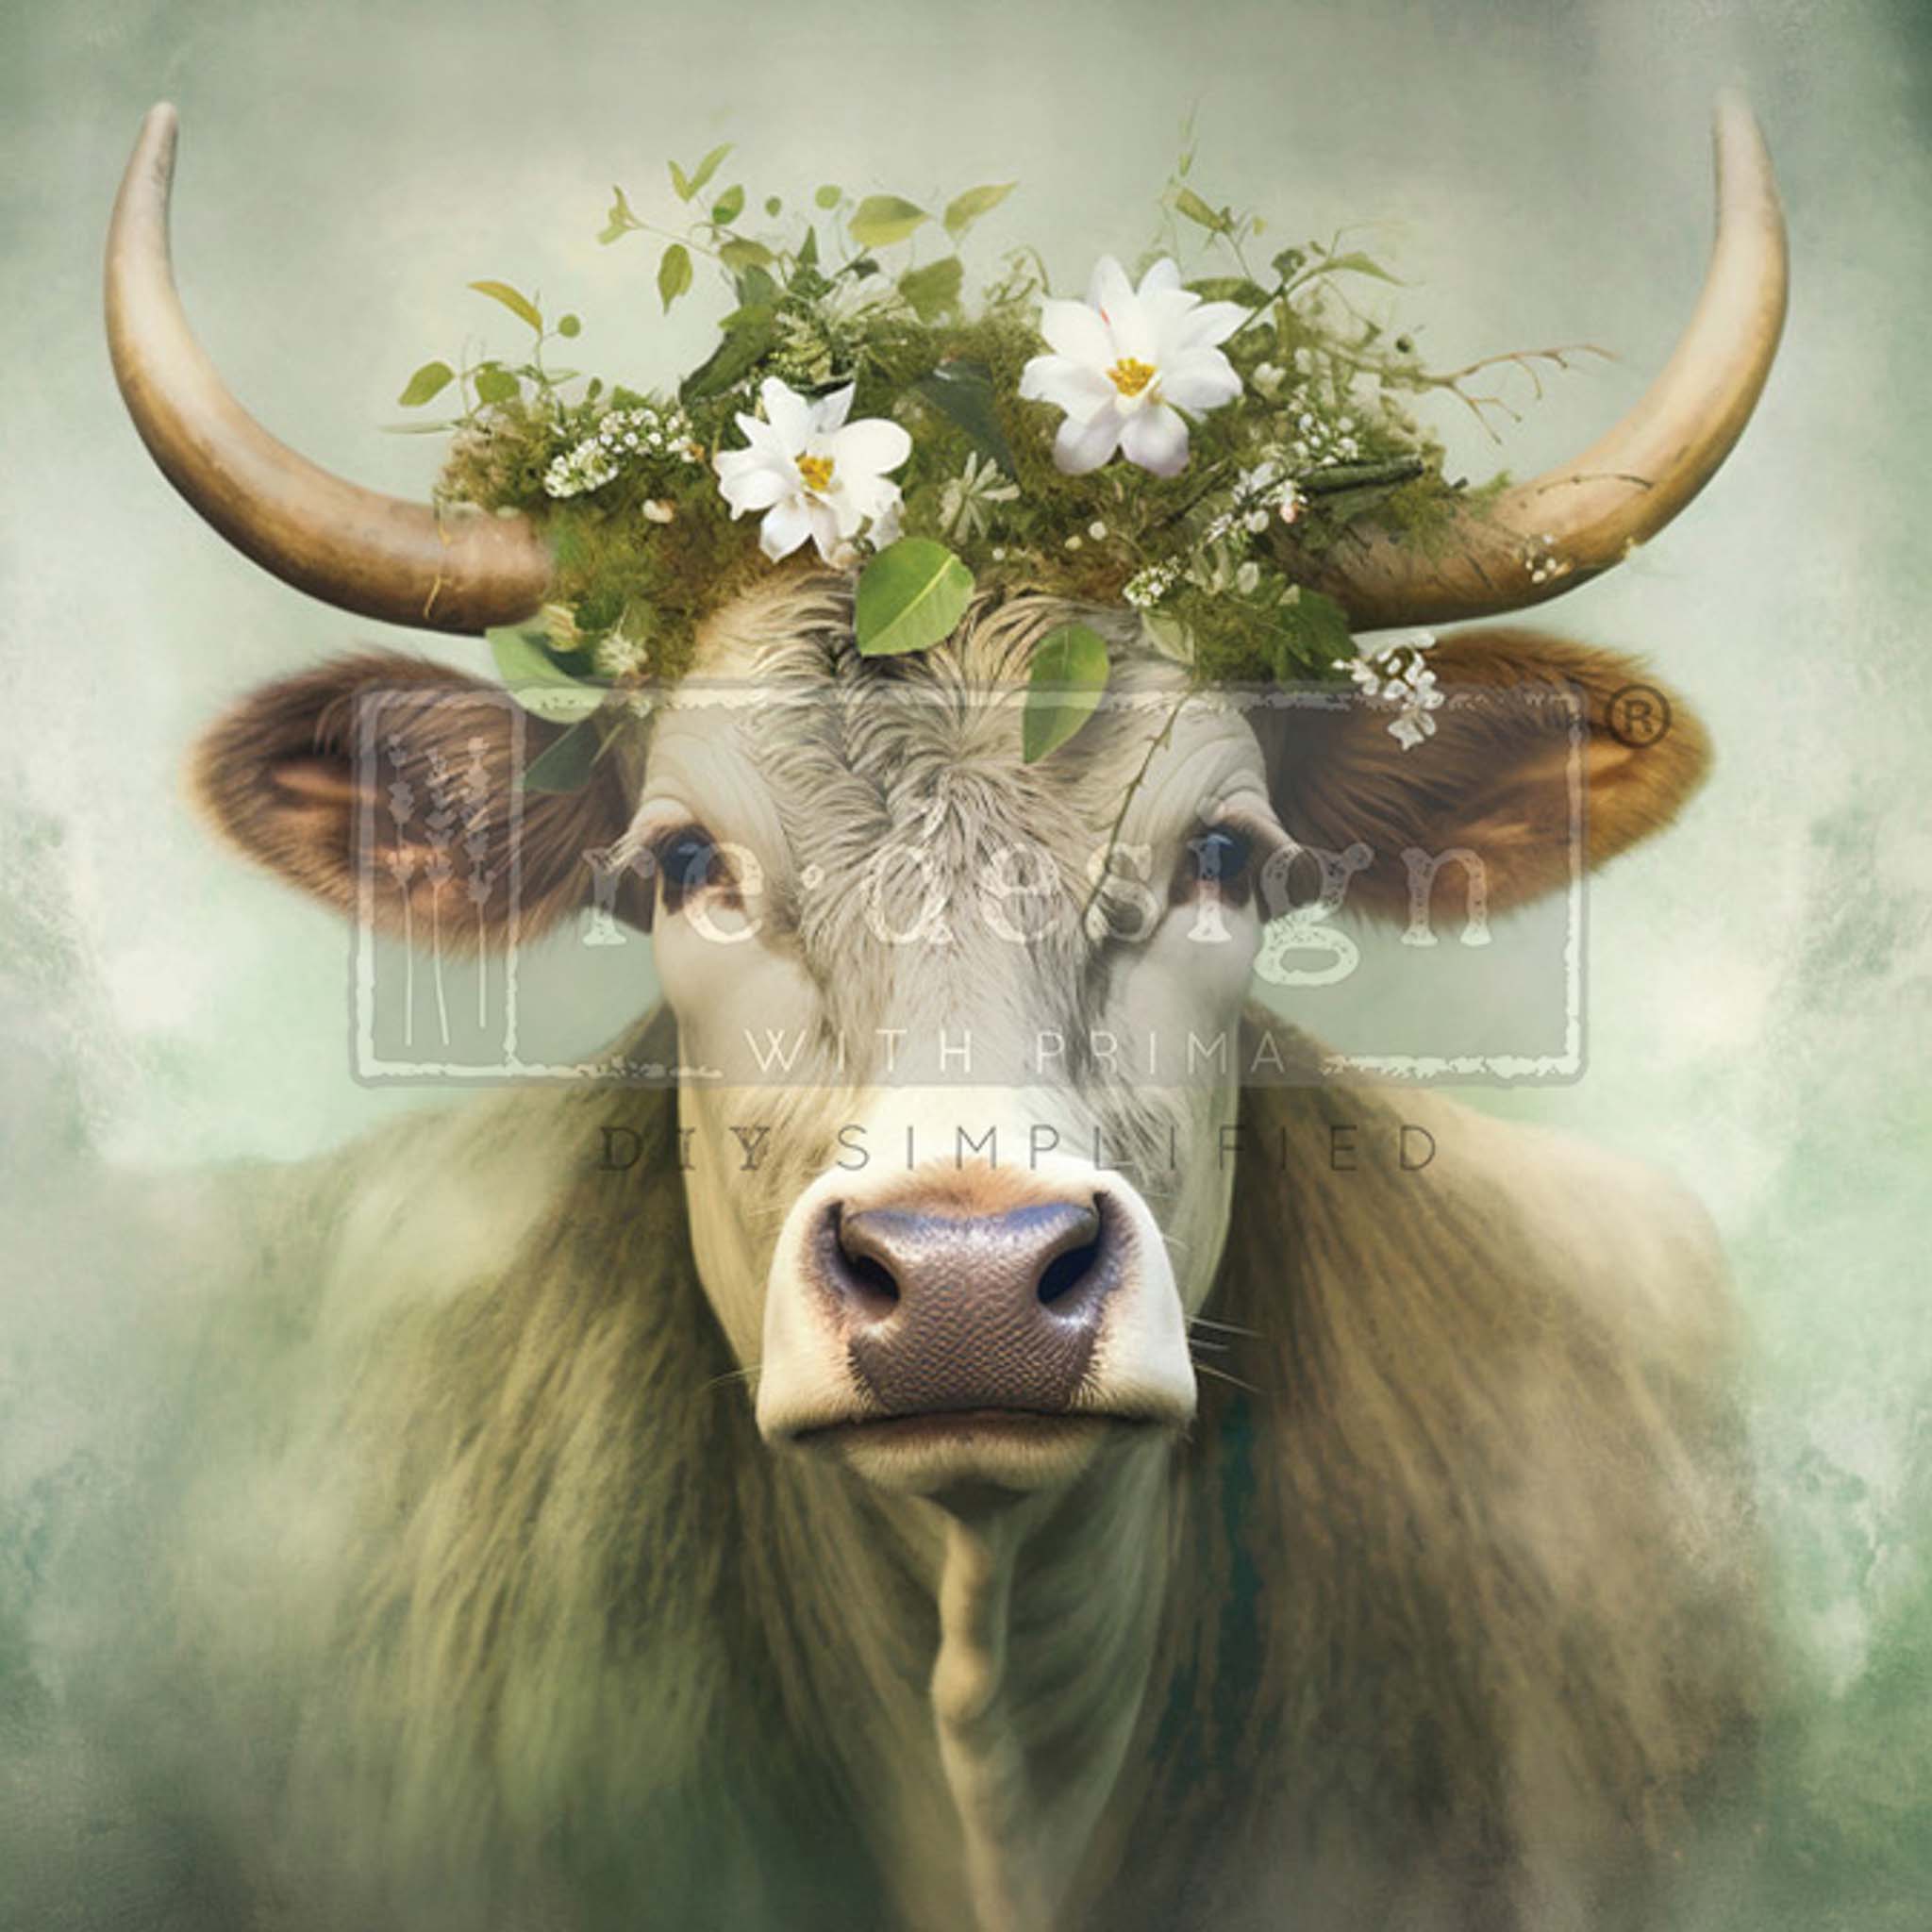 Close-up of an A1 fiber paper featuring the portrait of a cow with horns wearing a floral crown against a soft green background.